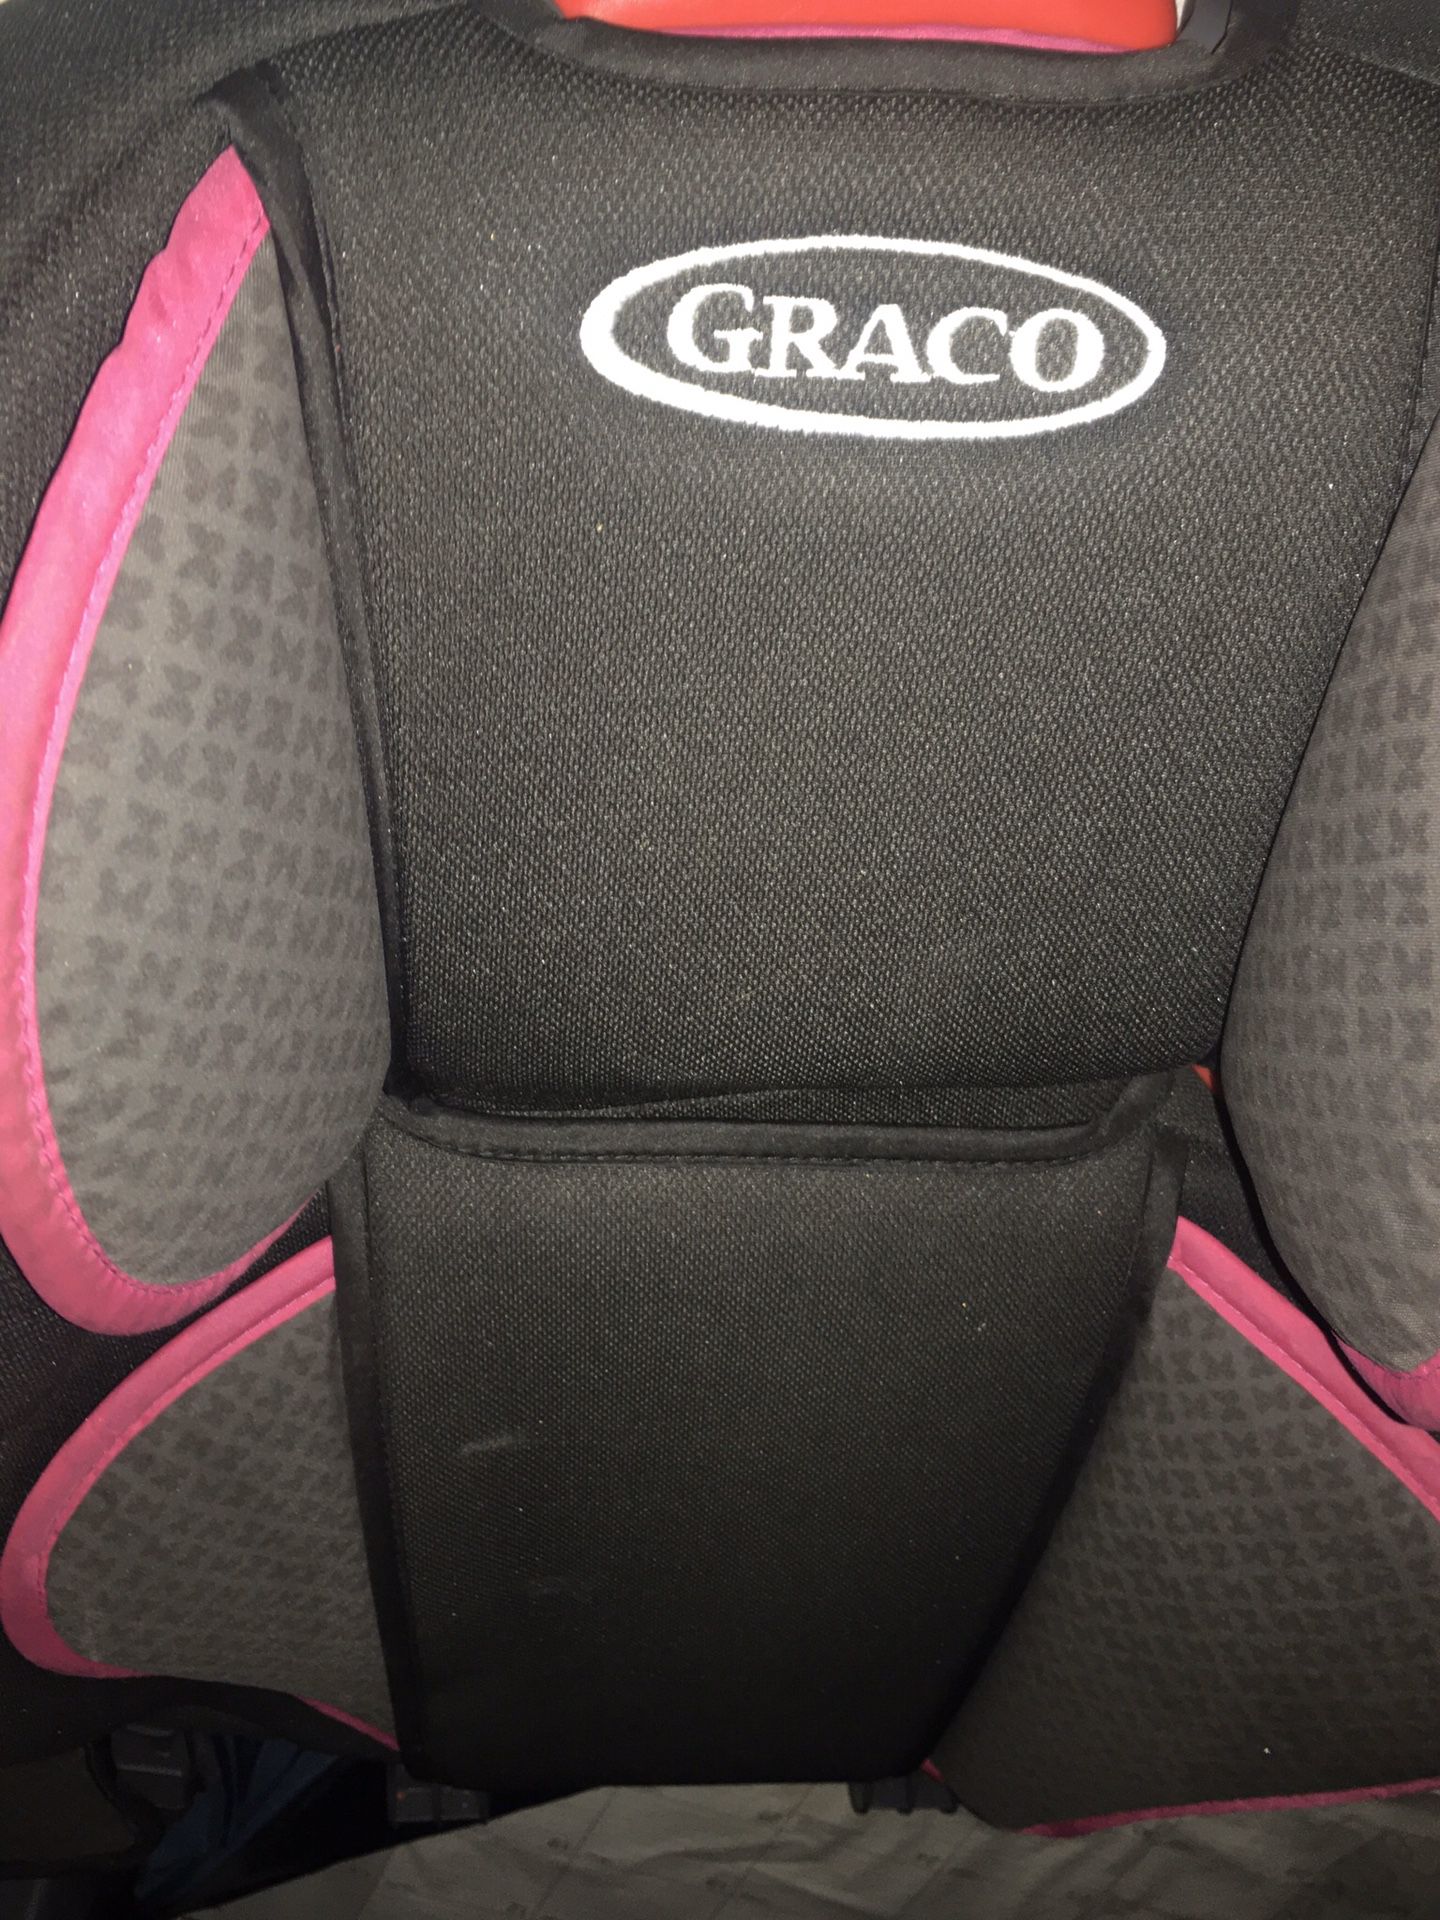 CAR SEAT/ BOOSTER graco good condition $10